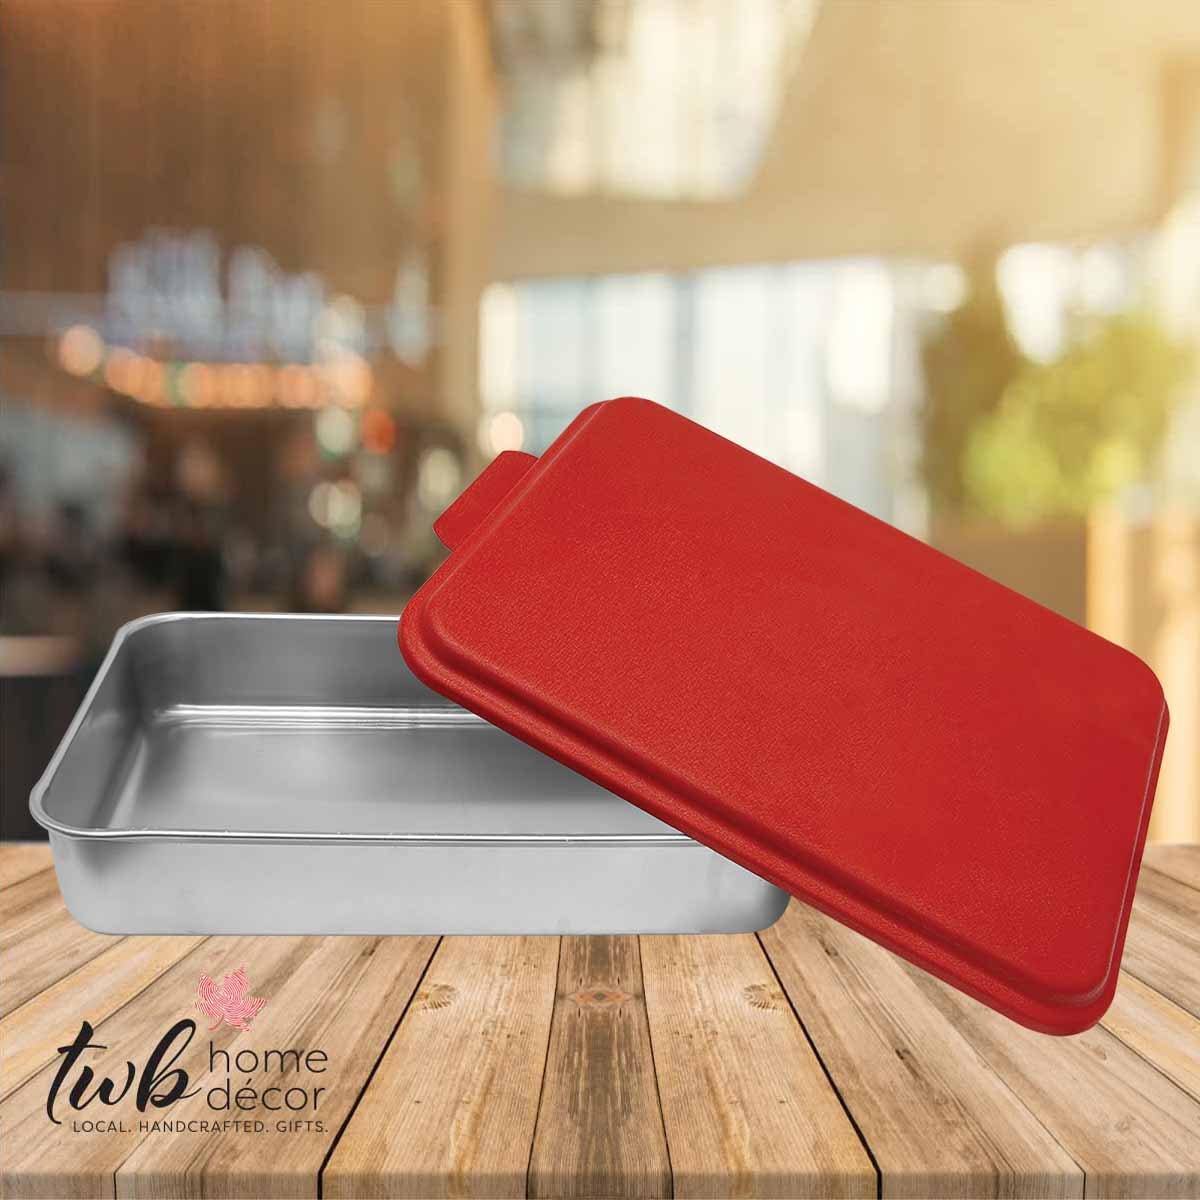 Made with Love in ... Kitchen Cake Pan with lid - CUSTOM - TWB Home Decor